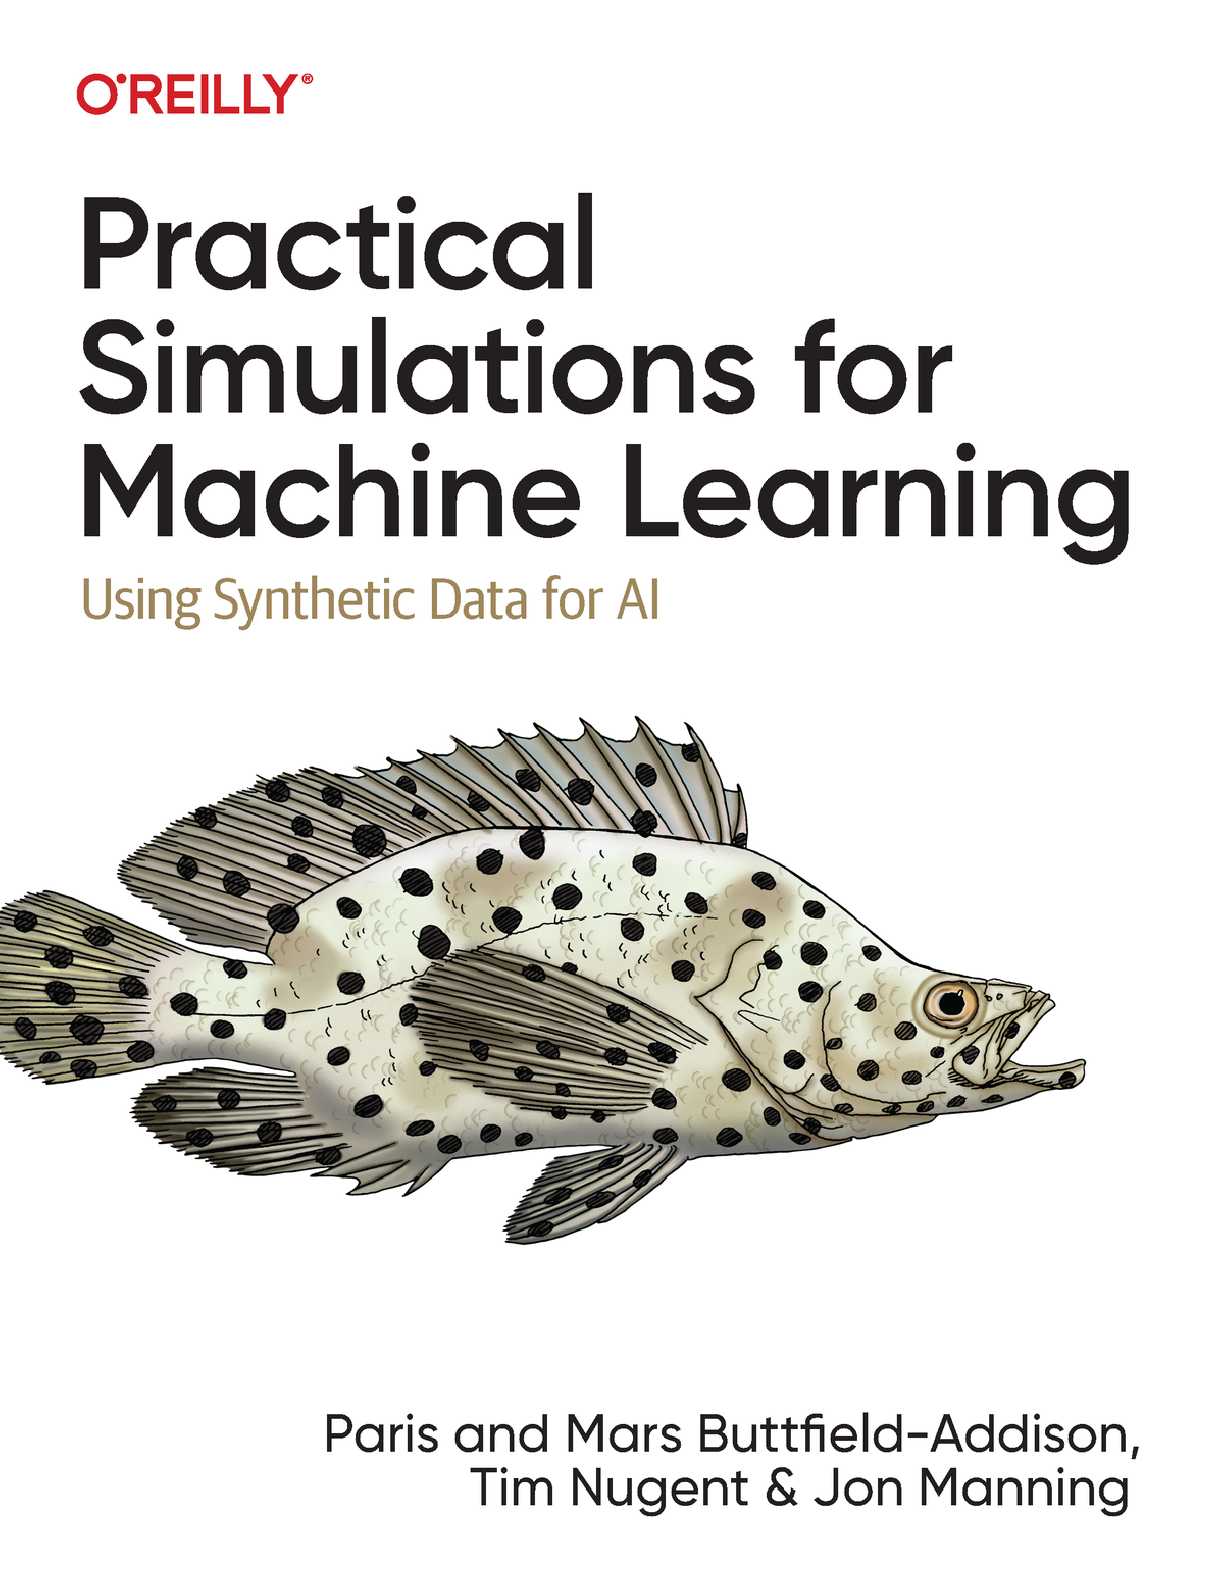 Practical Simulations for Machine Learning: Using Synthetic Data for AI PDF